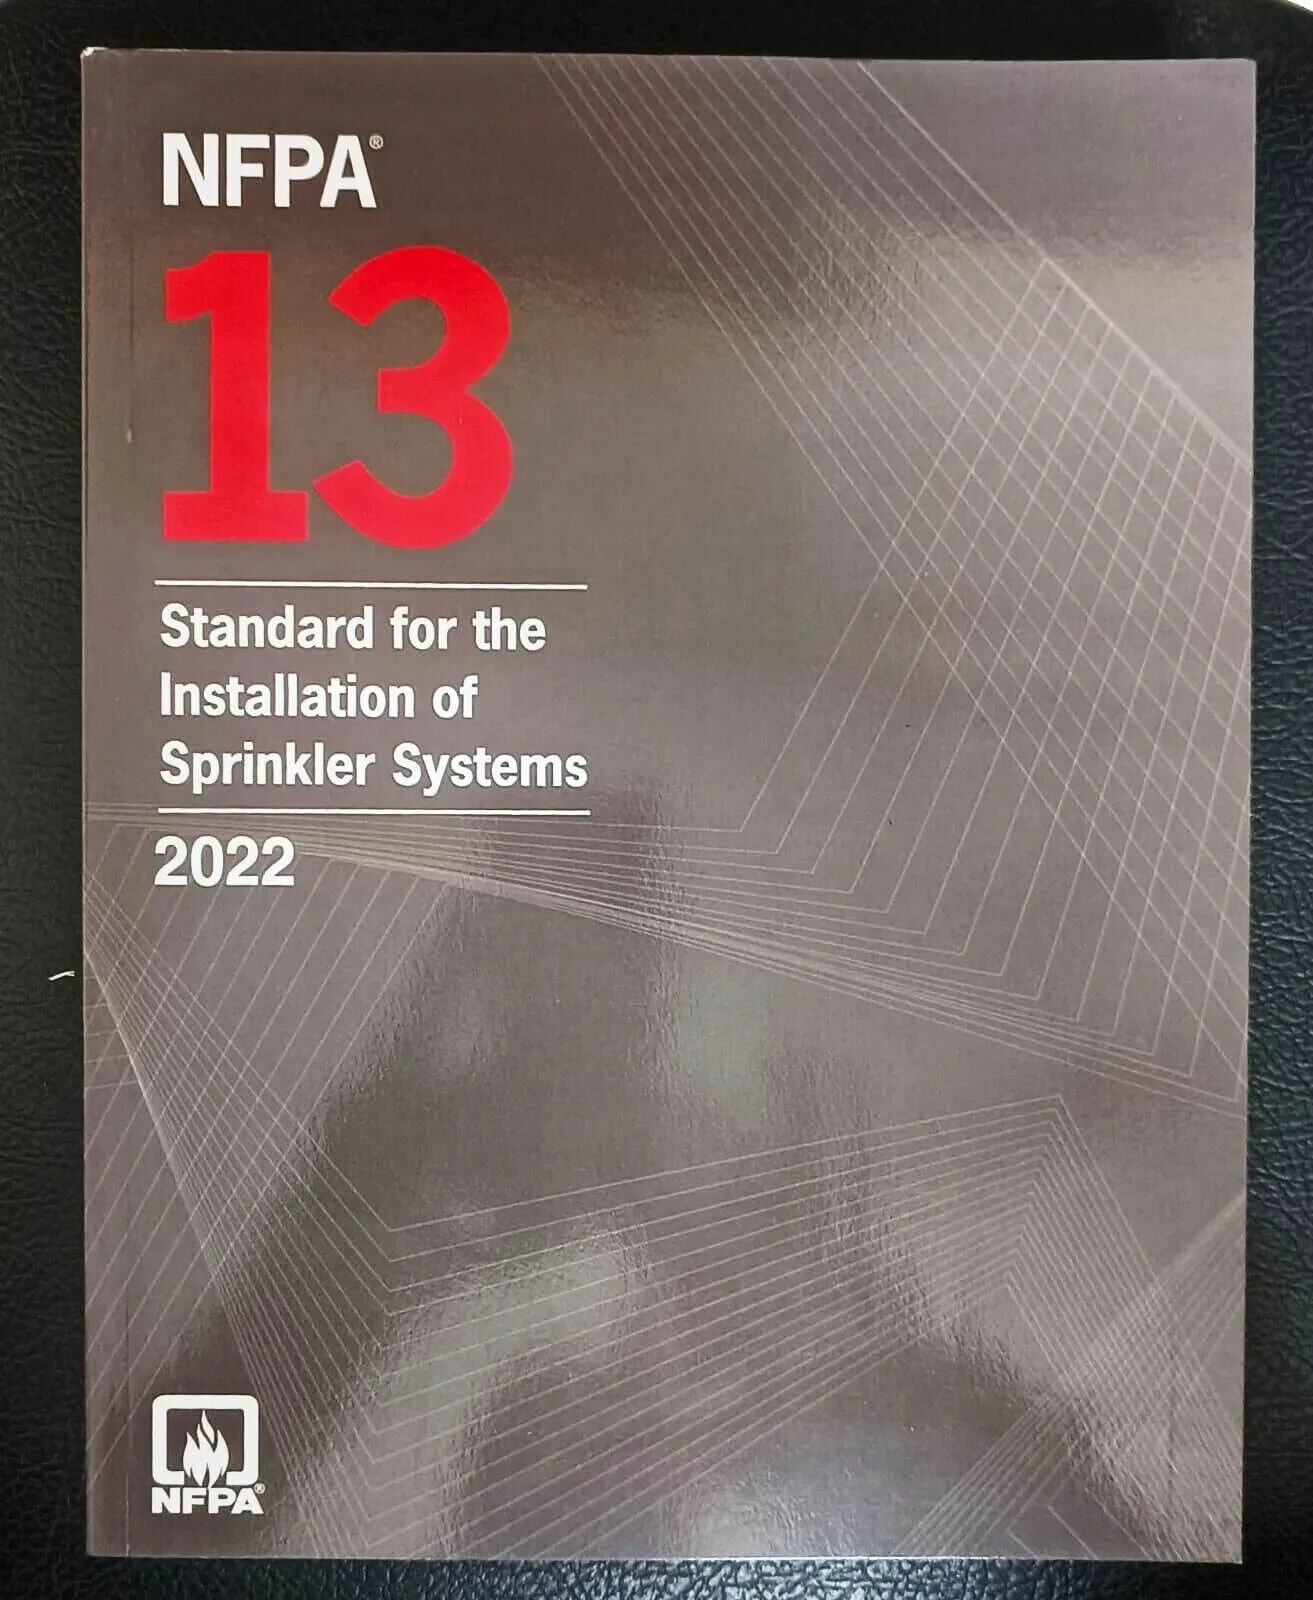 NFPA 13 Standard for the Installation of Sprinkler Systems 2022 Ed. USA STOCK